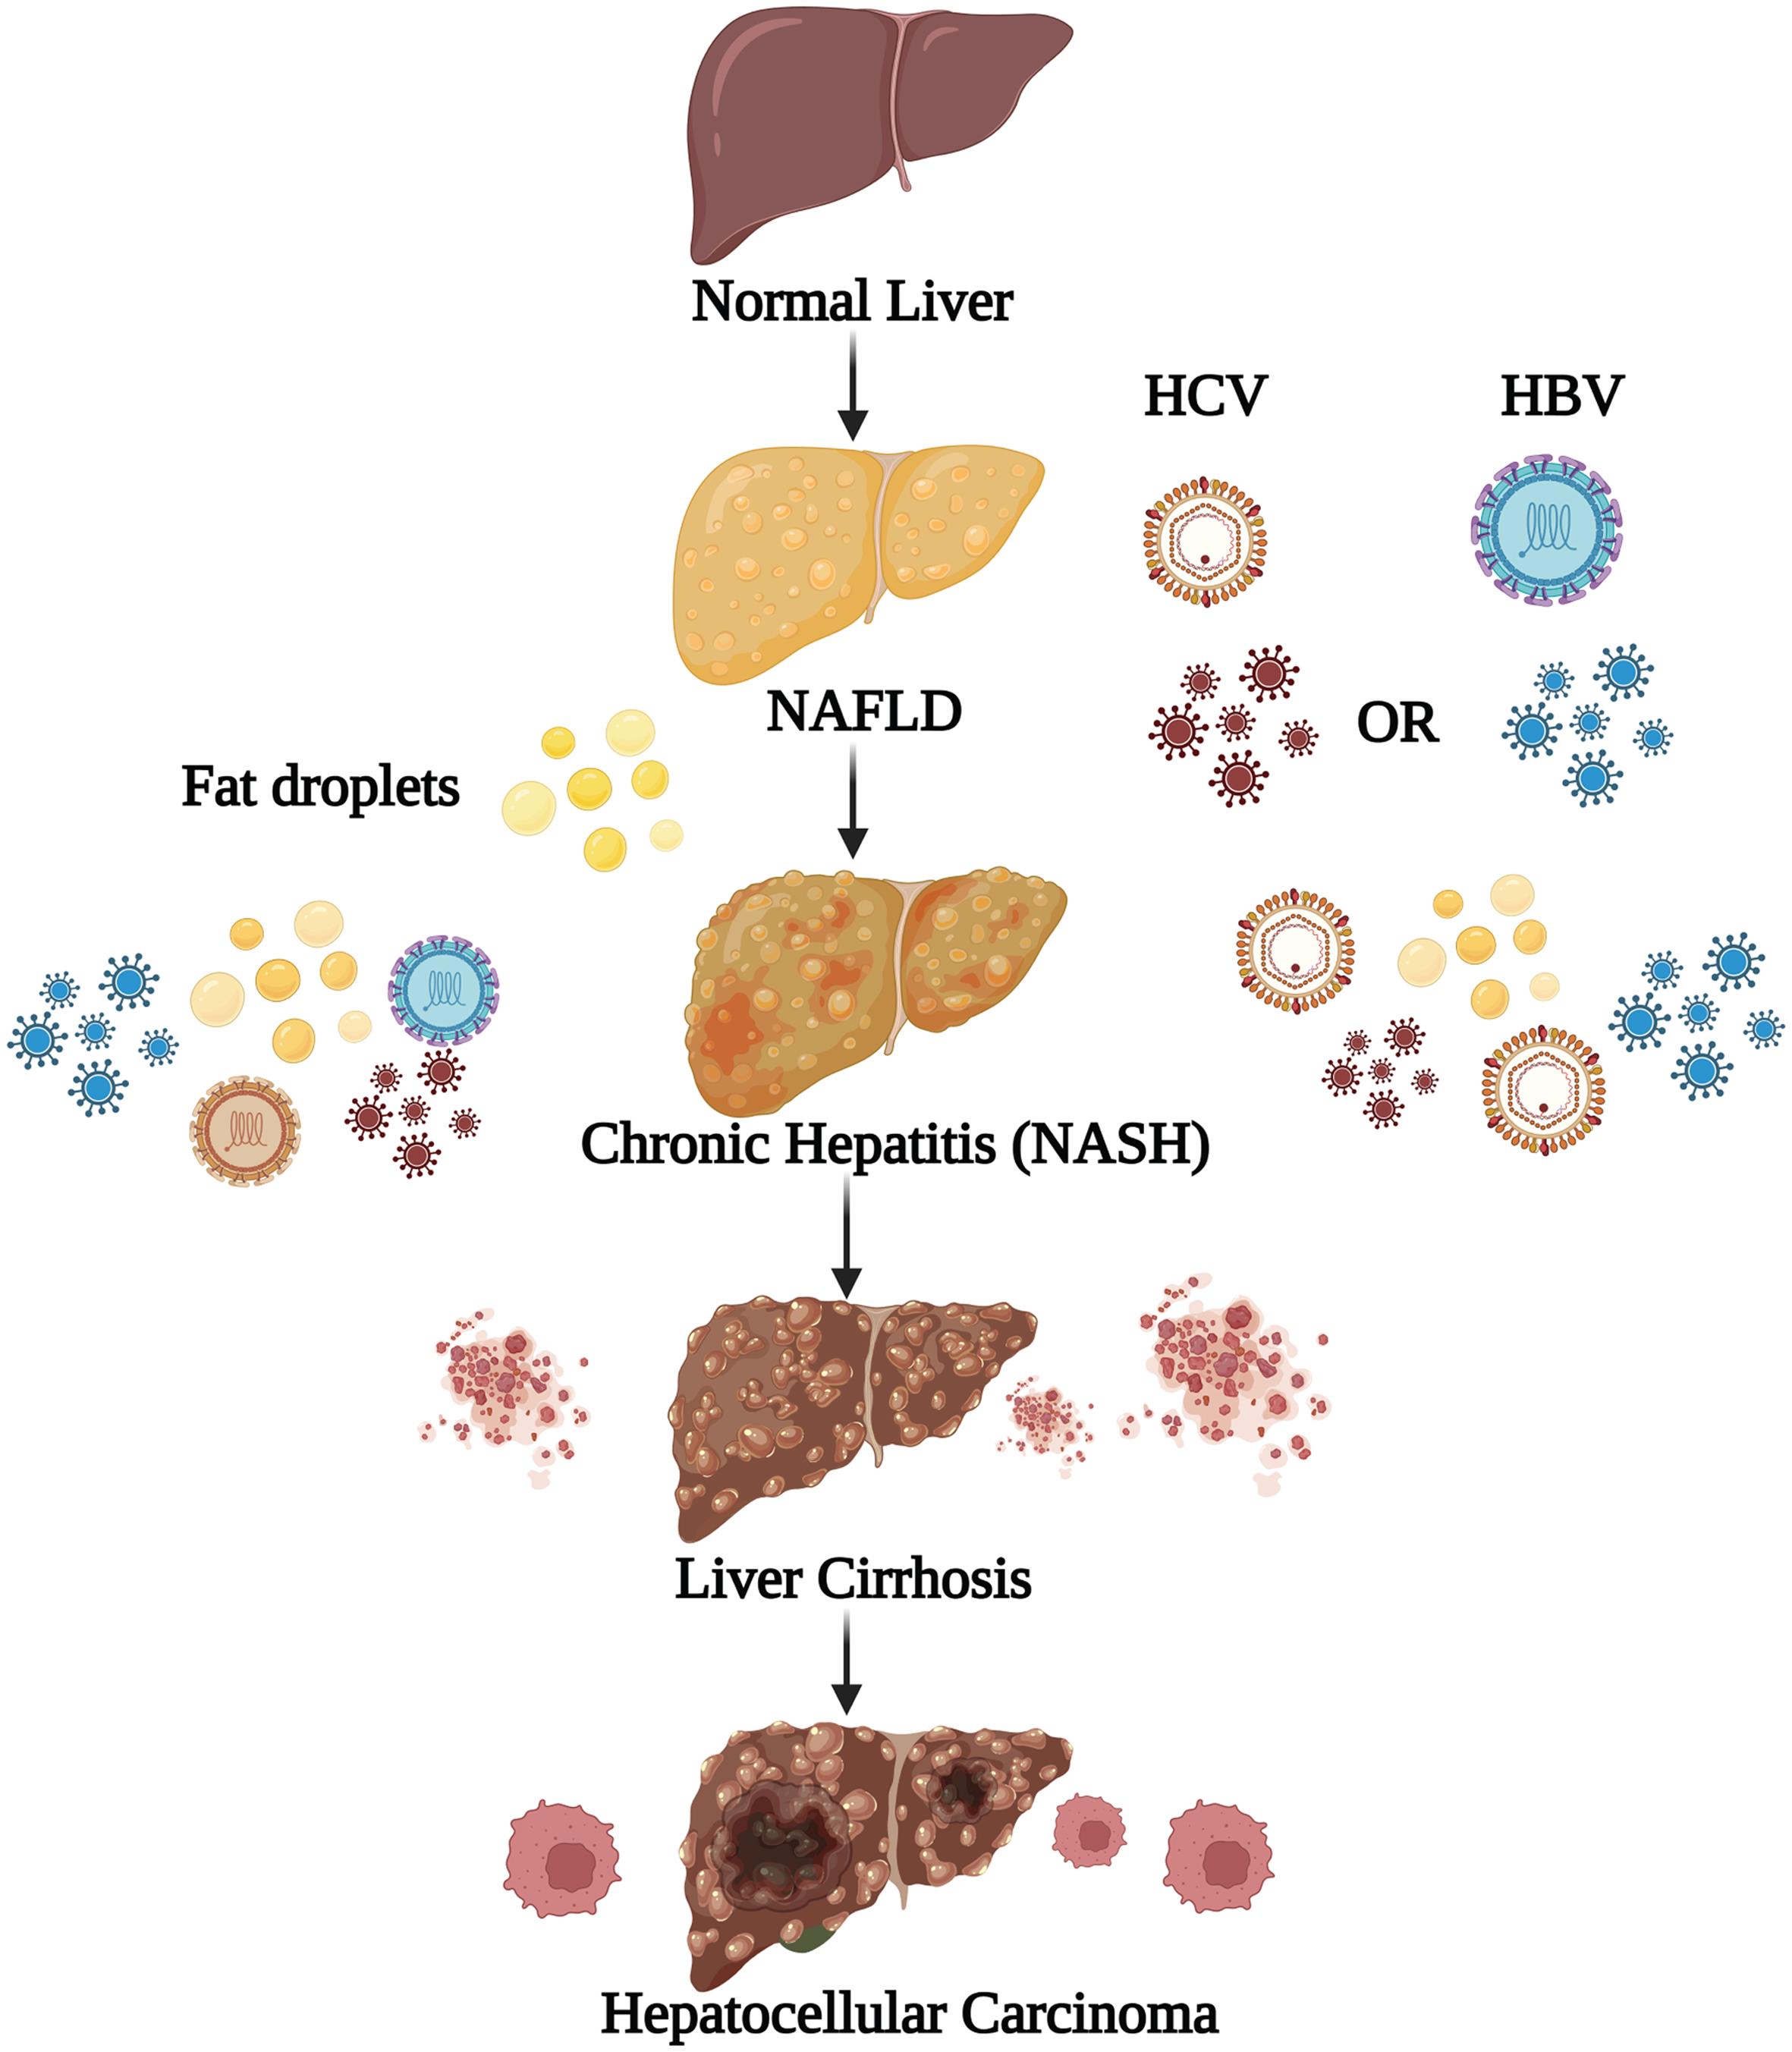 Different stages involved in the transfer of normal liver into hepatocellular carcinoma.